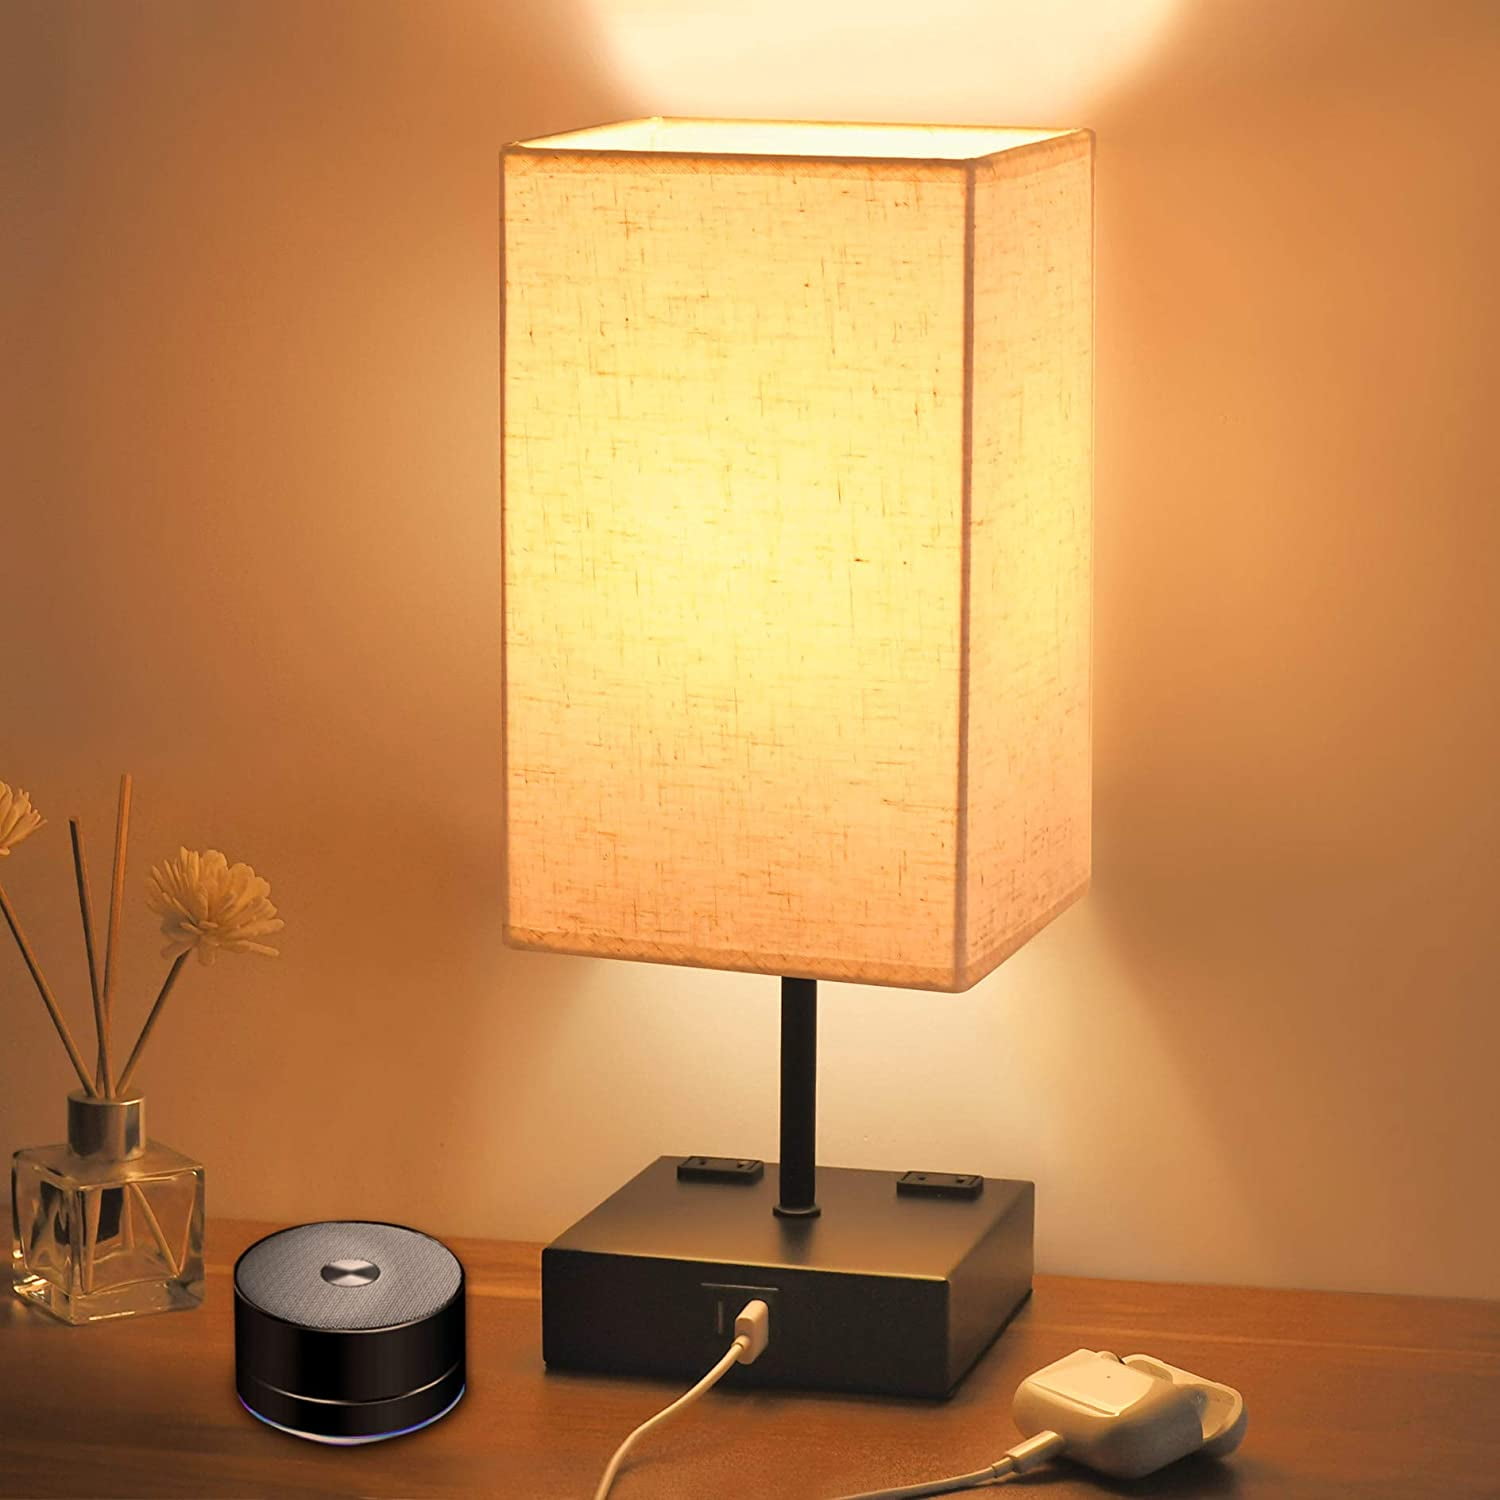 Touch Bedside Lamp for Breastfeeding Sailstar Dimmable Night Light for Kids 